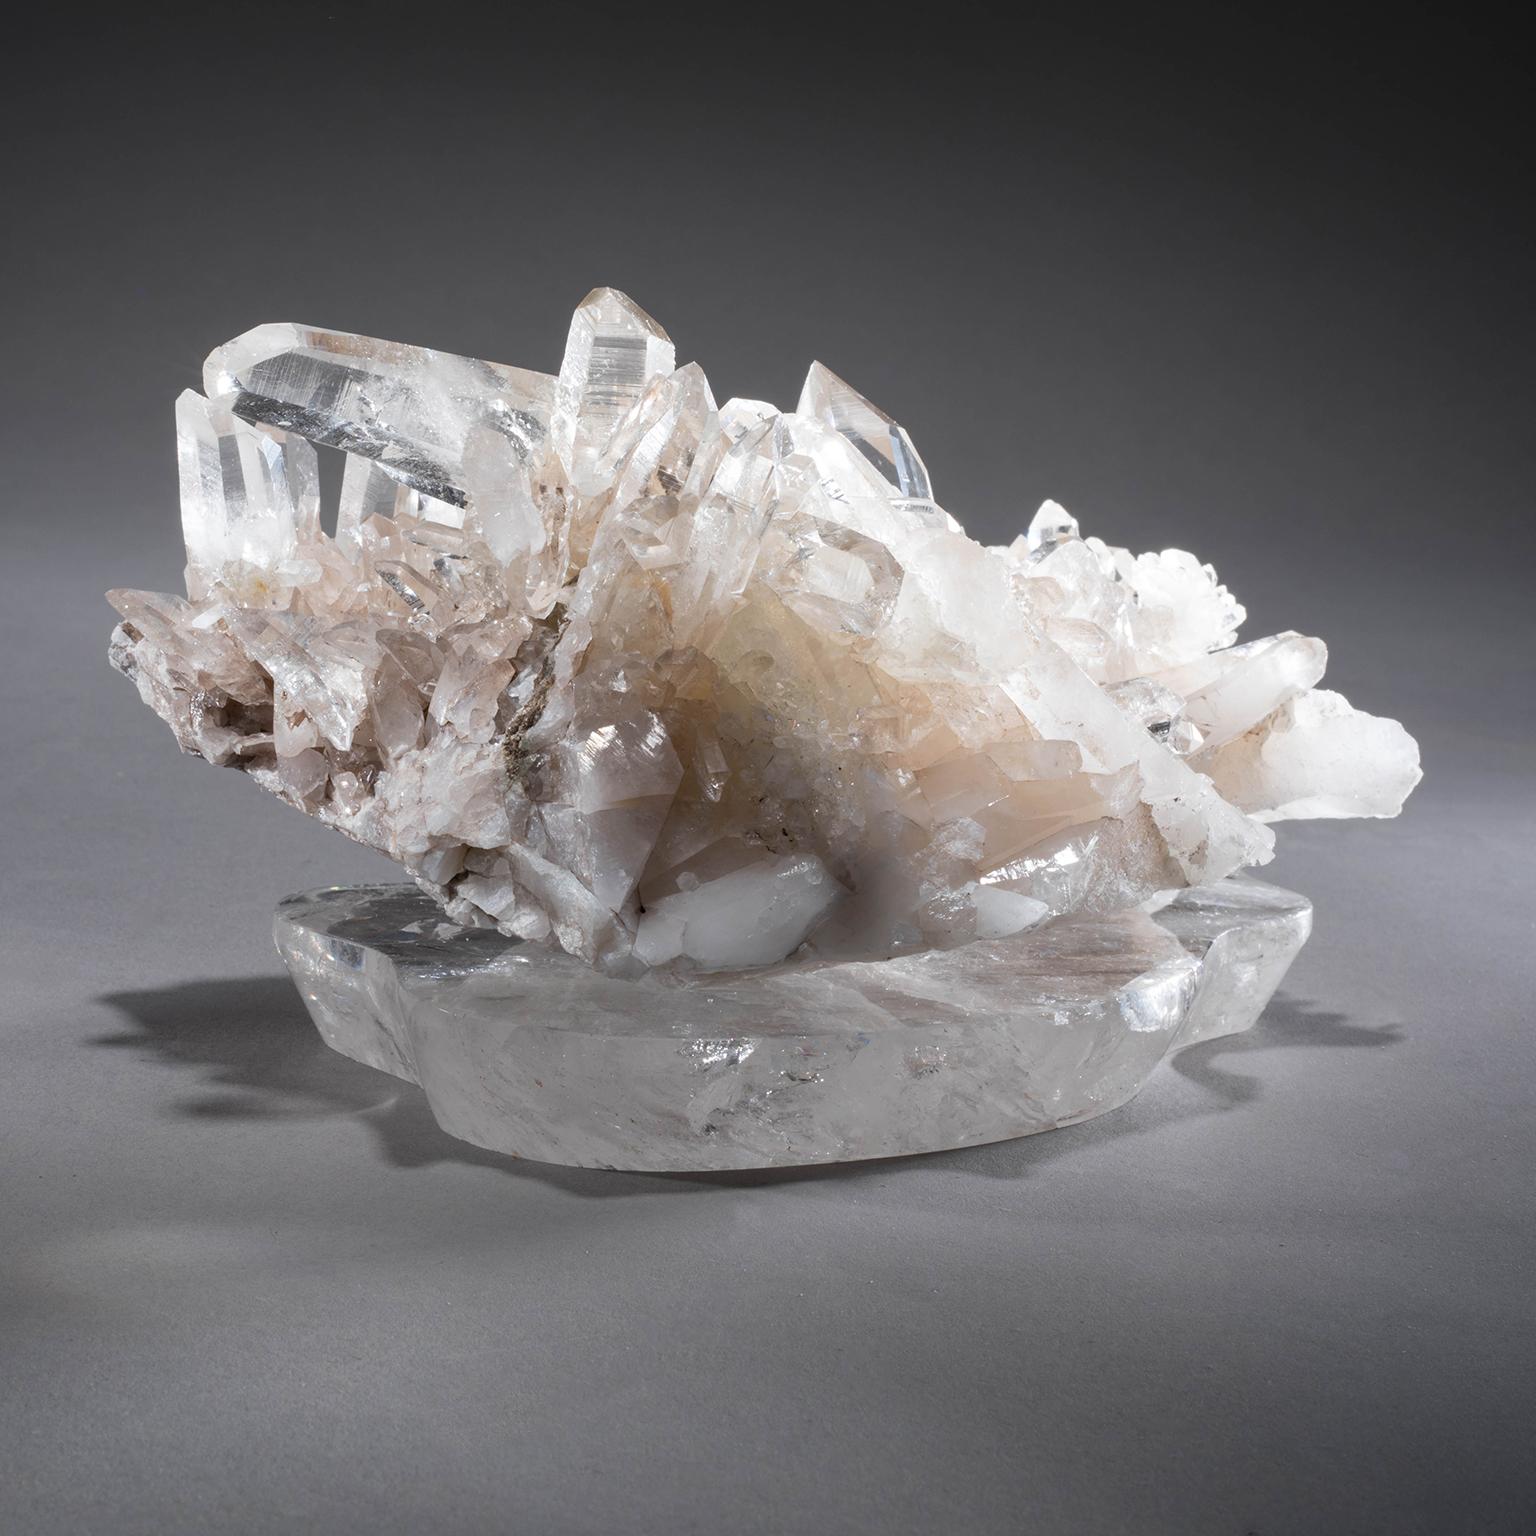 SMALL HIMALAYAN QUARTZ ON CRYSTAL BASE

The small footprint of Studio Greytak’s Small Himalayan Quartz on Crystal Base belies its significance. Uncovered by hand and lovingly wrapped in fabric, this ancient mineral was carefully carried down from